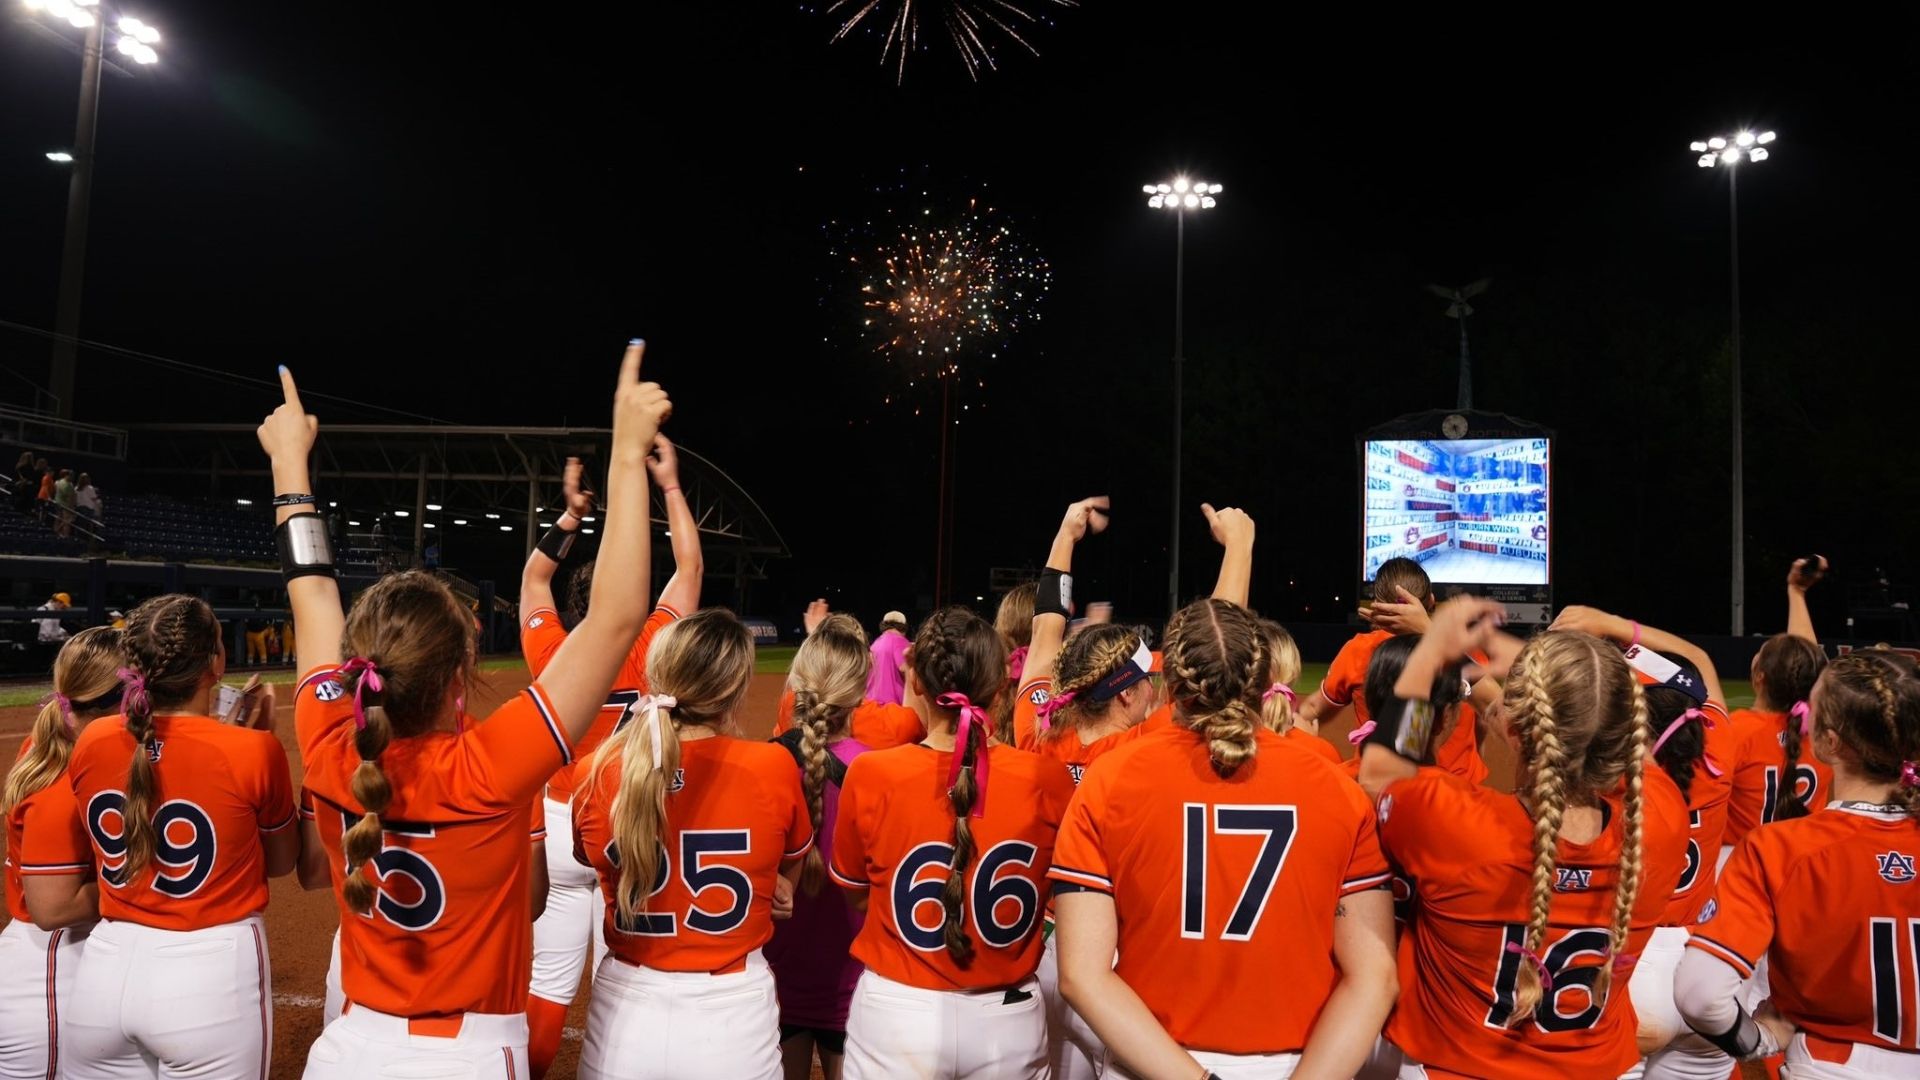 Auburn's Bryant secures series sweep with walkoff